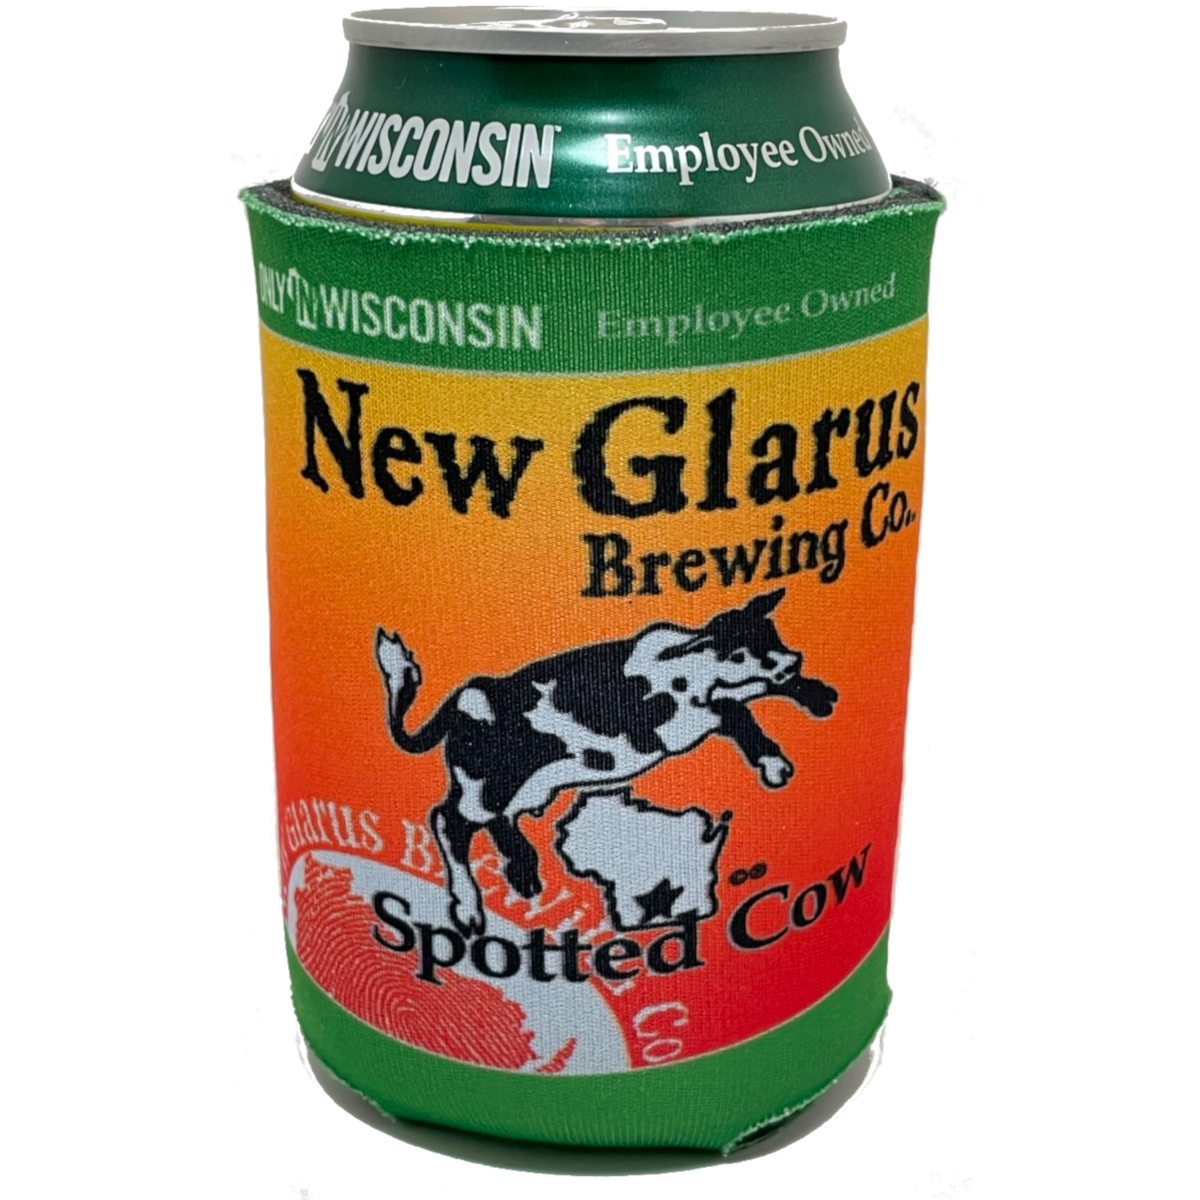 Can coozie with Spotted Cow logo on front with orange/yellow background and green borders.